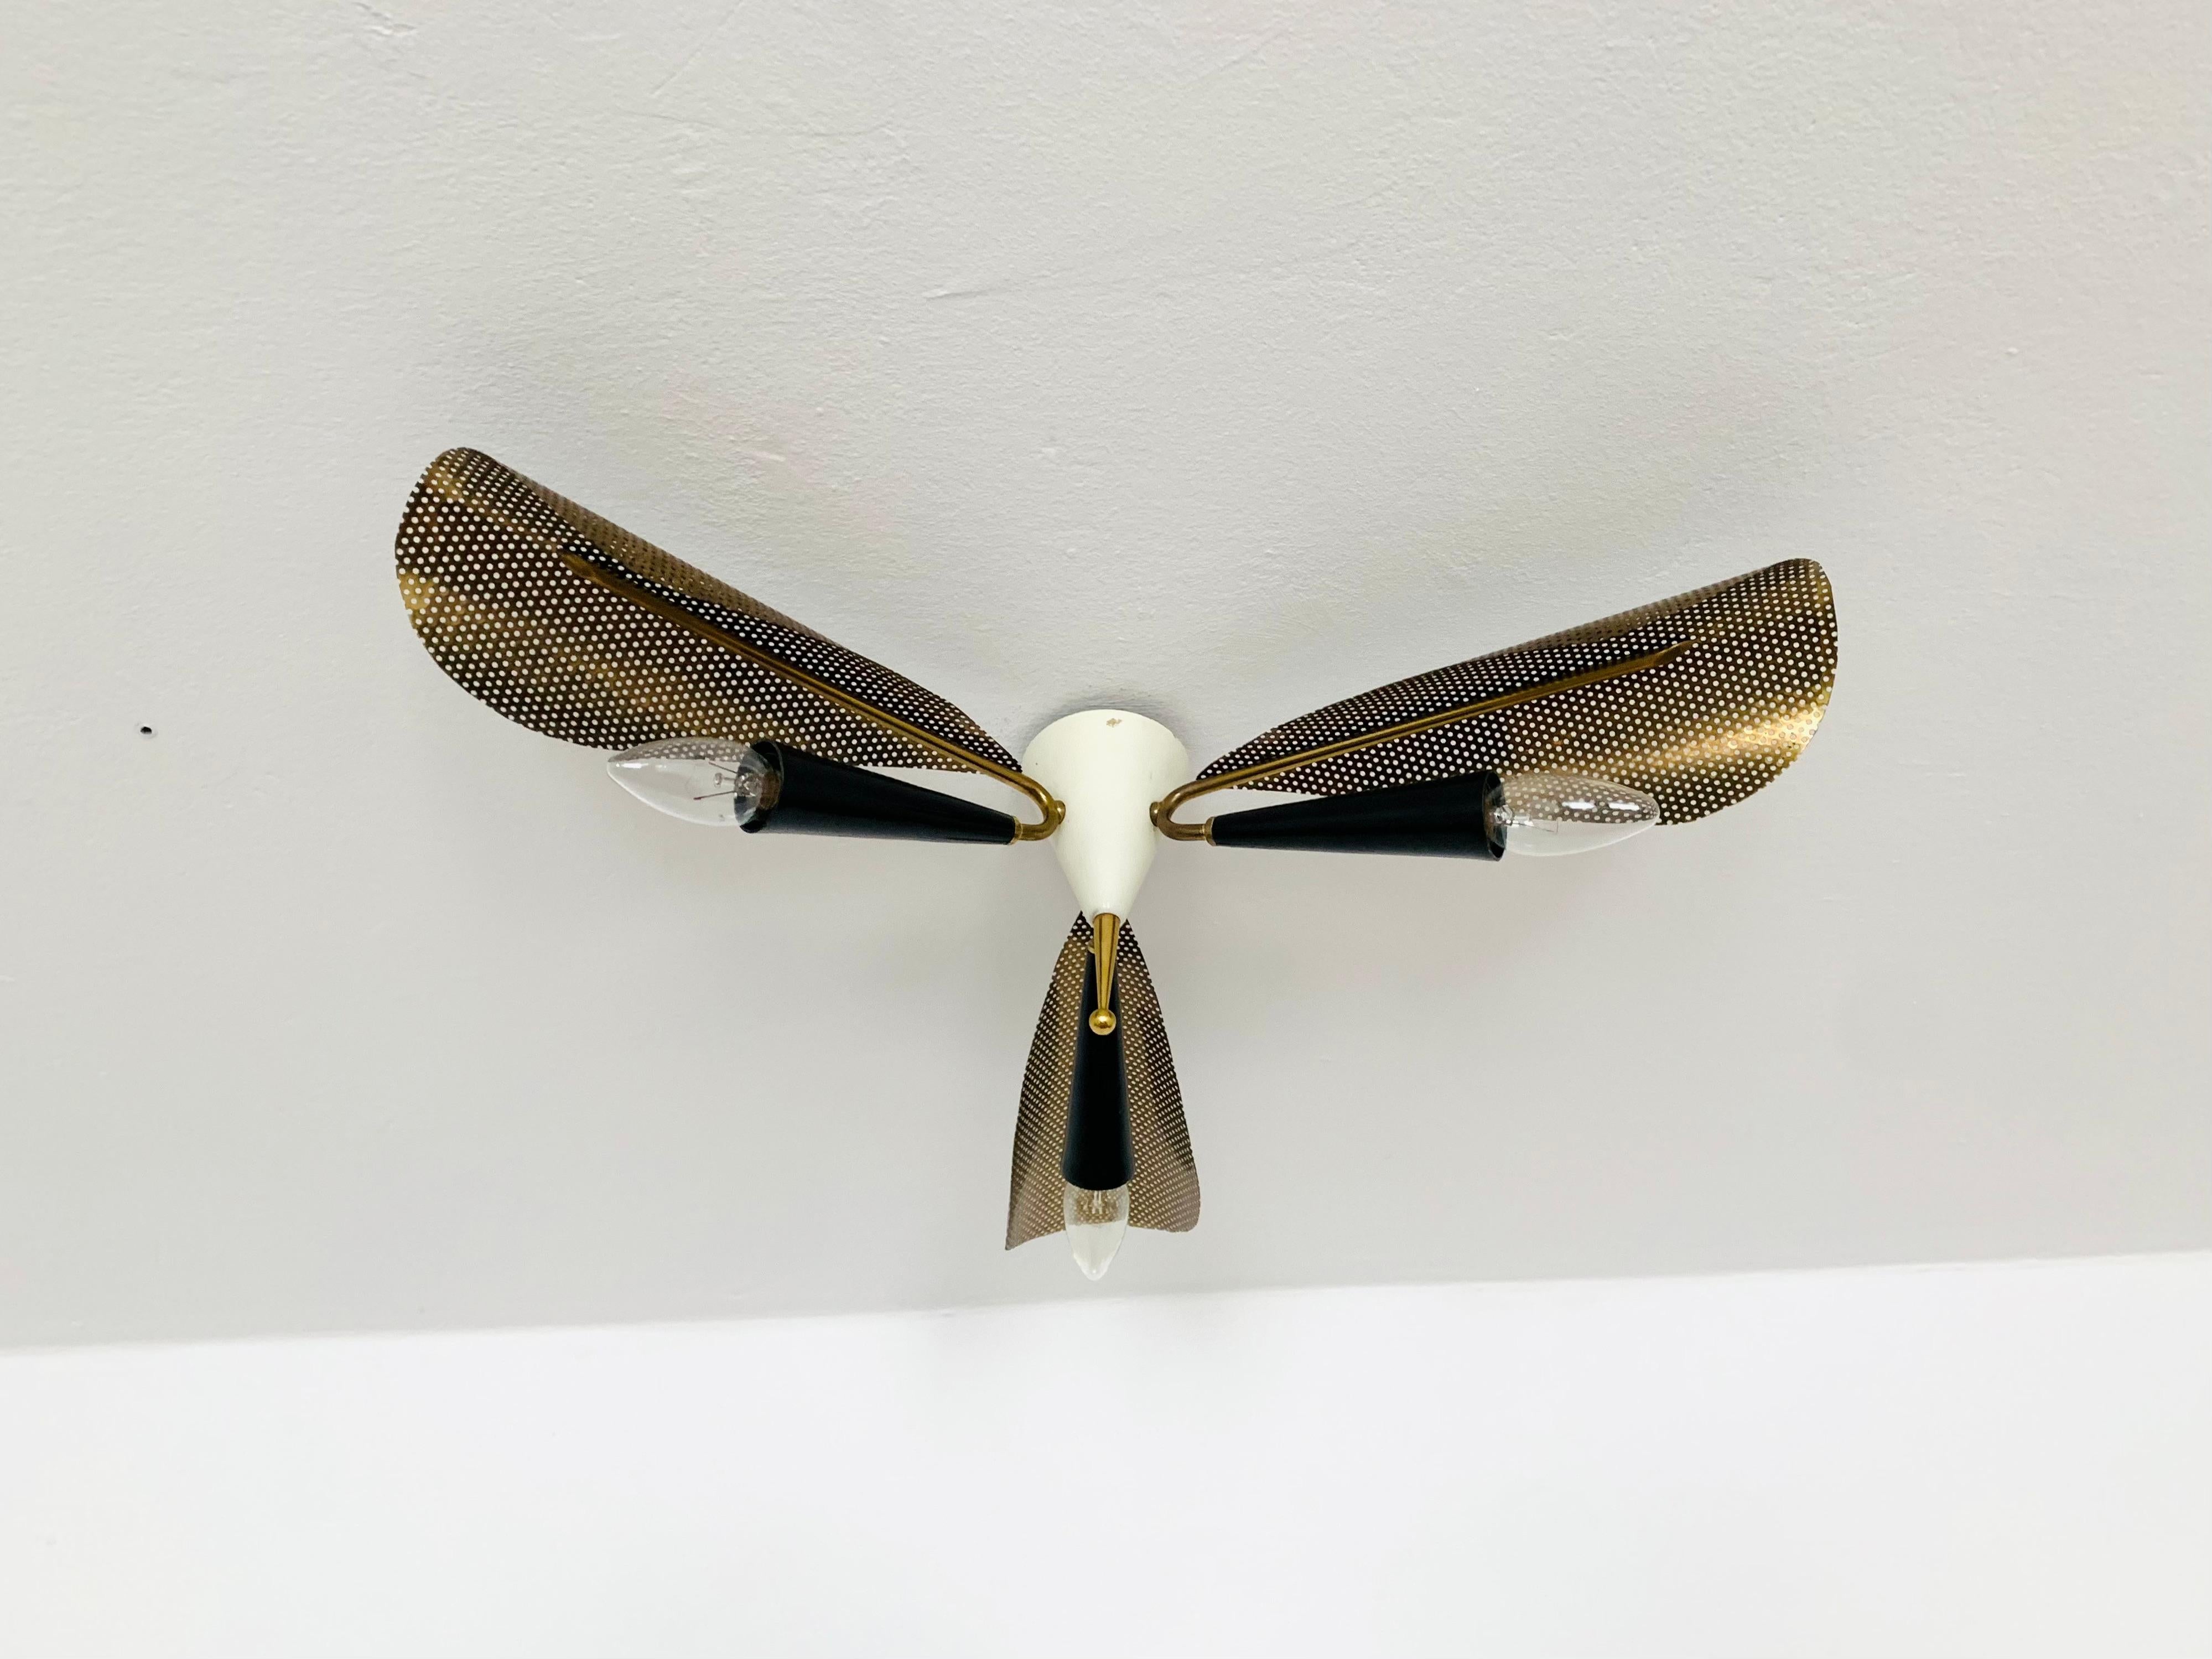 Exceptional Italian ceiling lamp from the 1950s.
Very decorative and high-quality workmanship.
Wonderful design and an asset to any home.
A wonderful play of light is created.

Condition:

Very good vintage condition with slight signs of age-related